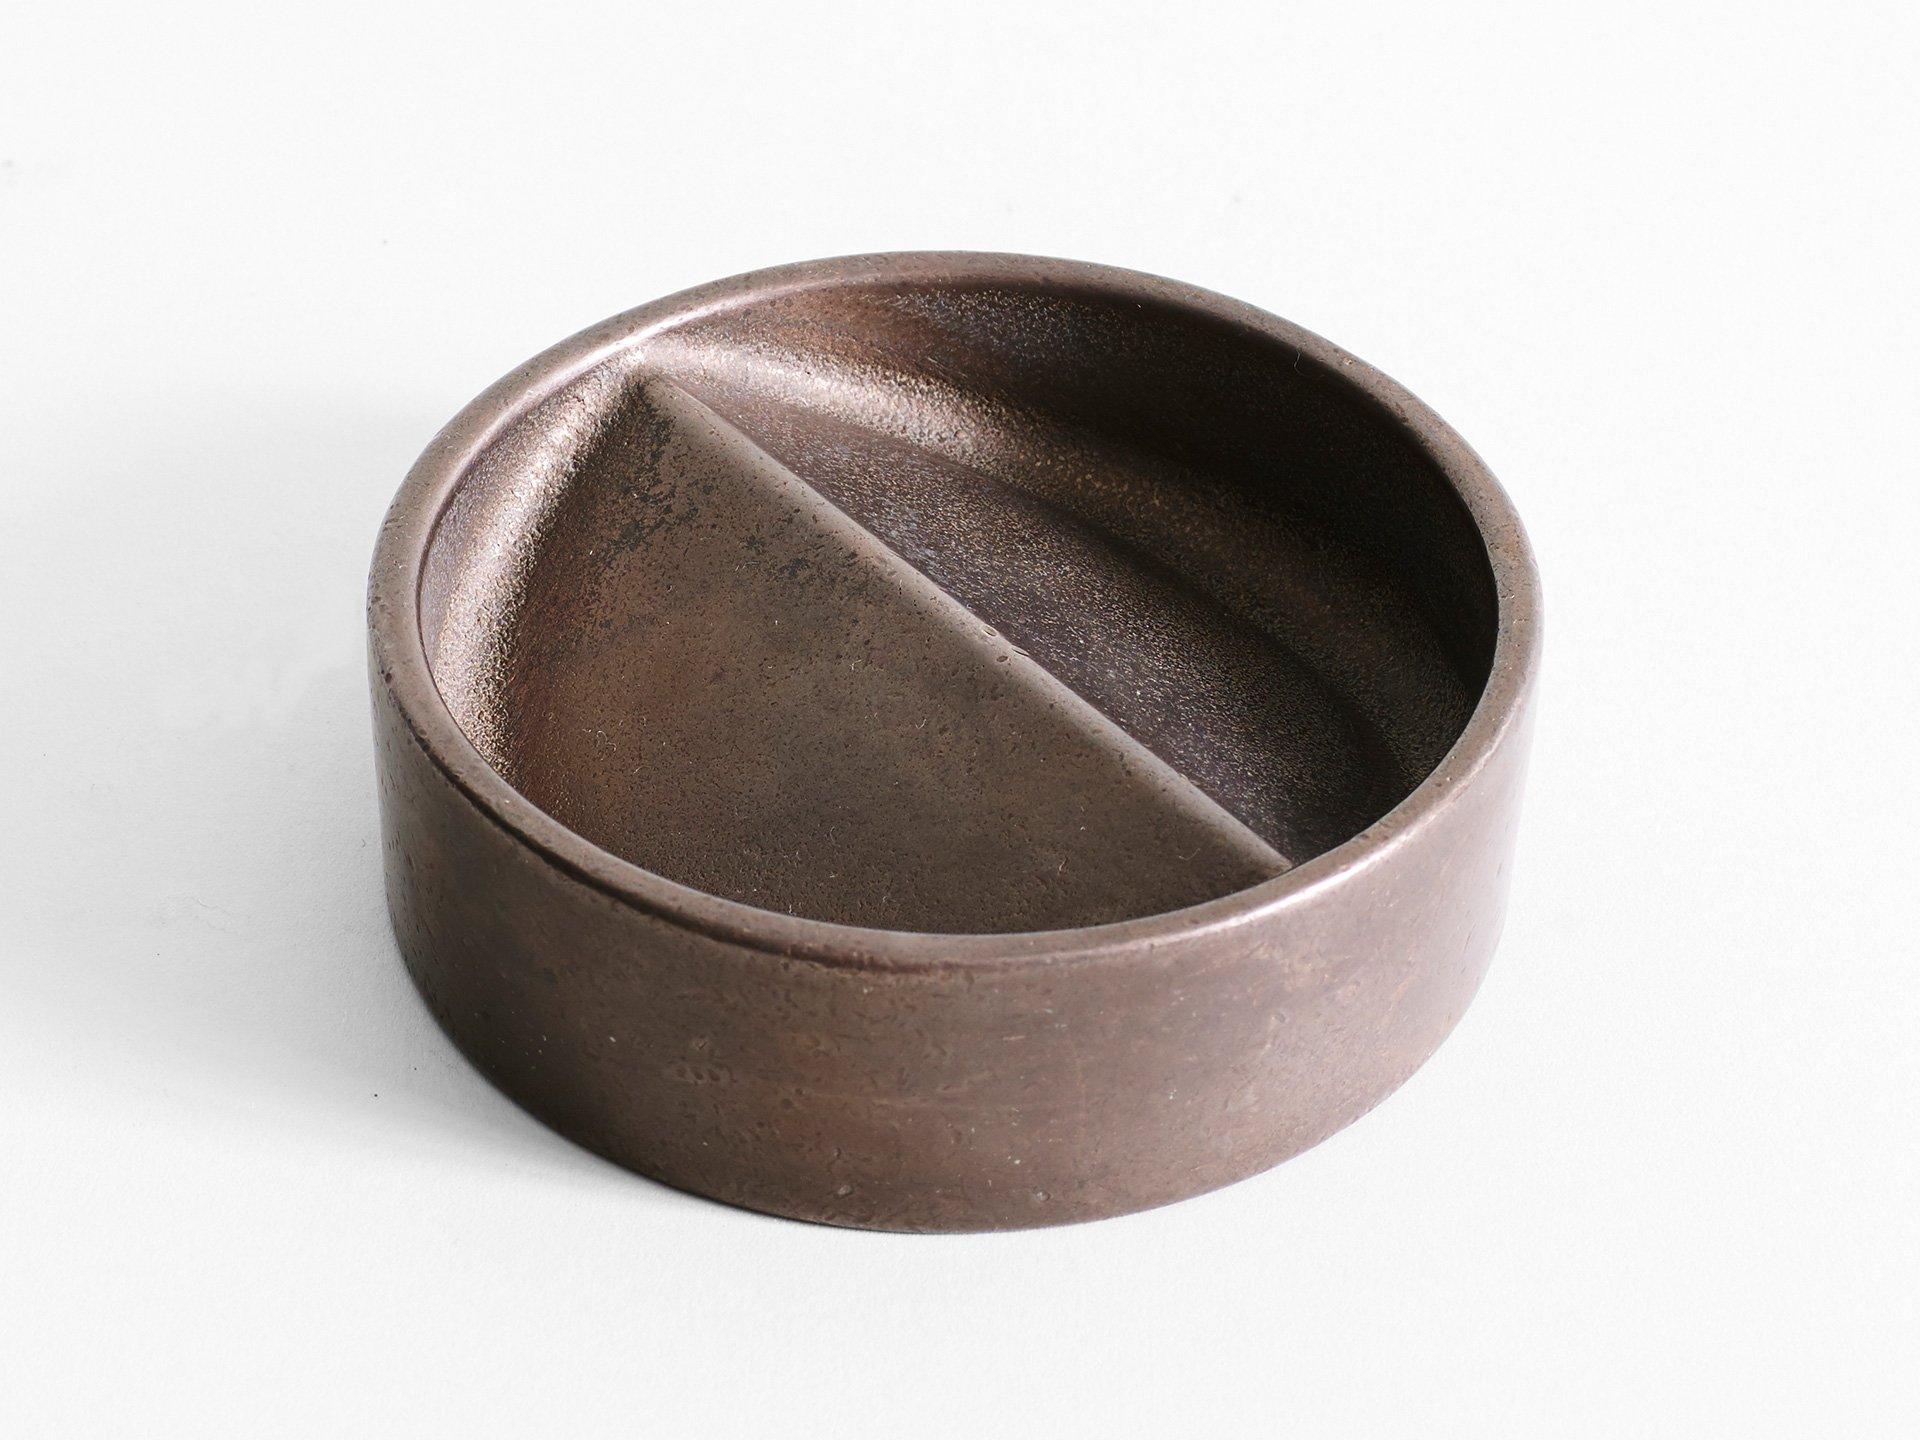 Round Vide Poche by Henry Wilson
Discard your day at the door. 

Your Vide Poche is designed with your loose-pocket items in mind – think keys, change and phone. It is made, polished and finished in Sydney, Australia in solid Gunmetal Bronze.